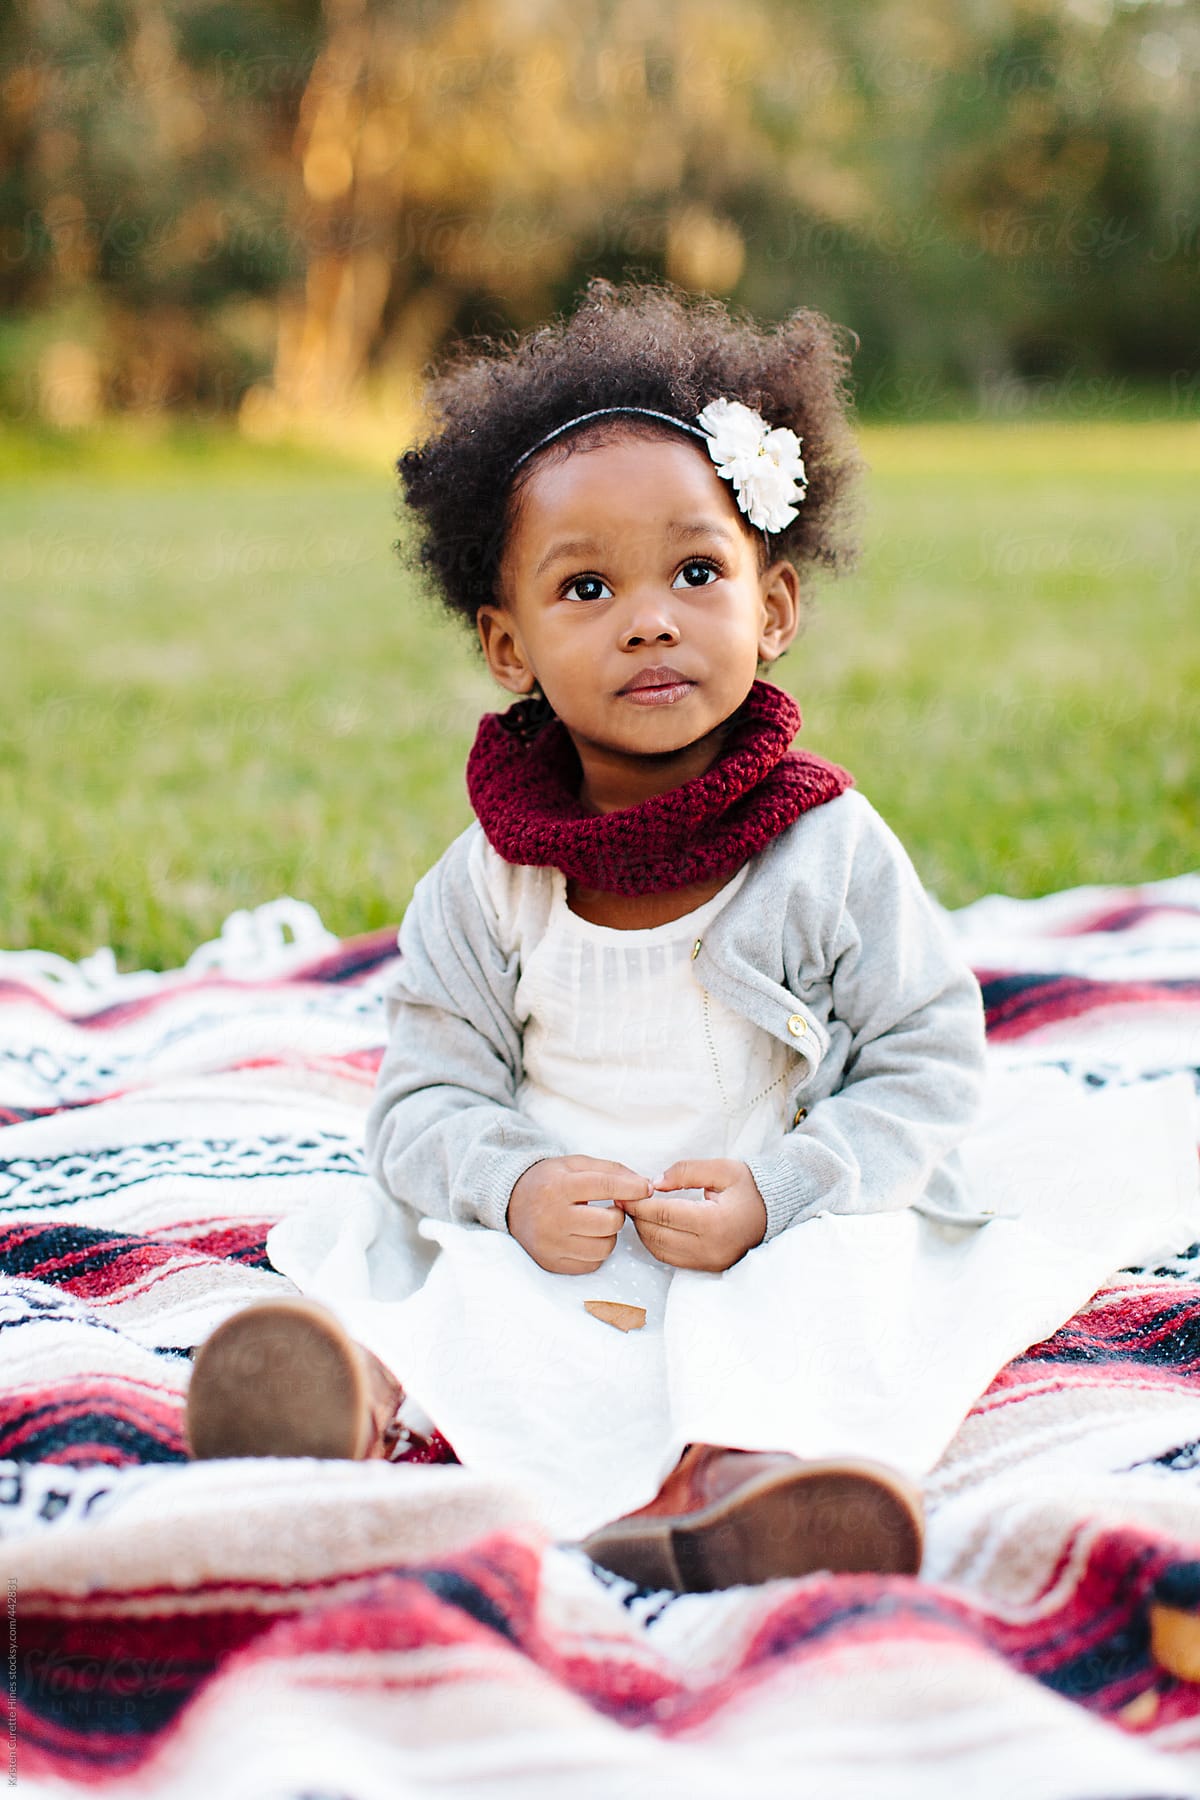 Beautiful little girl sitting on a blanket and looking up at her parents